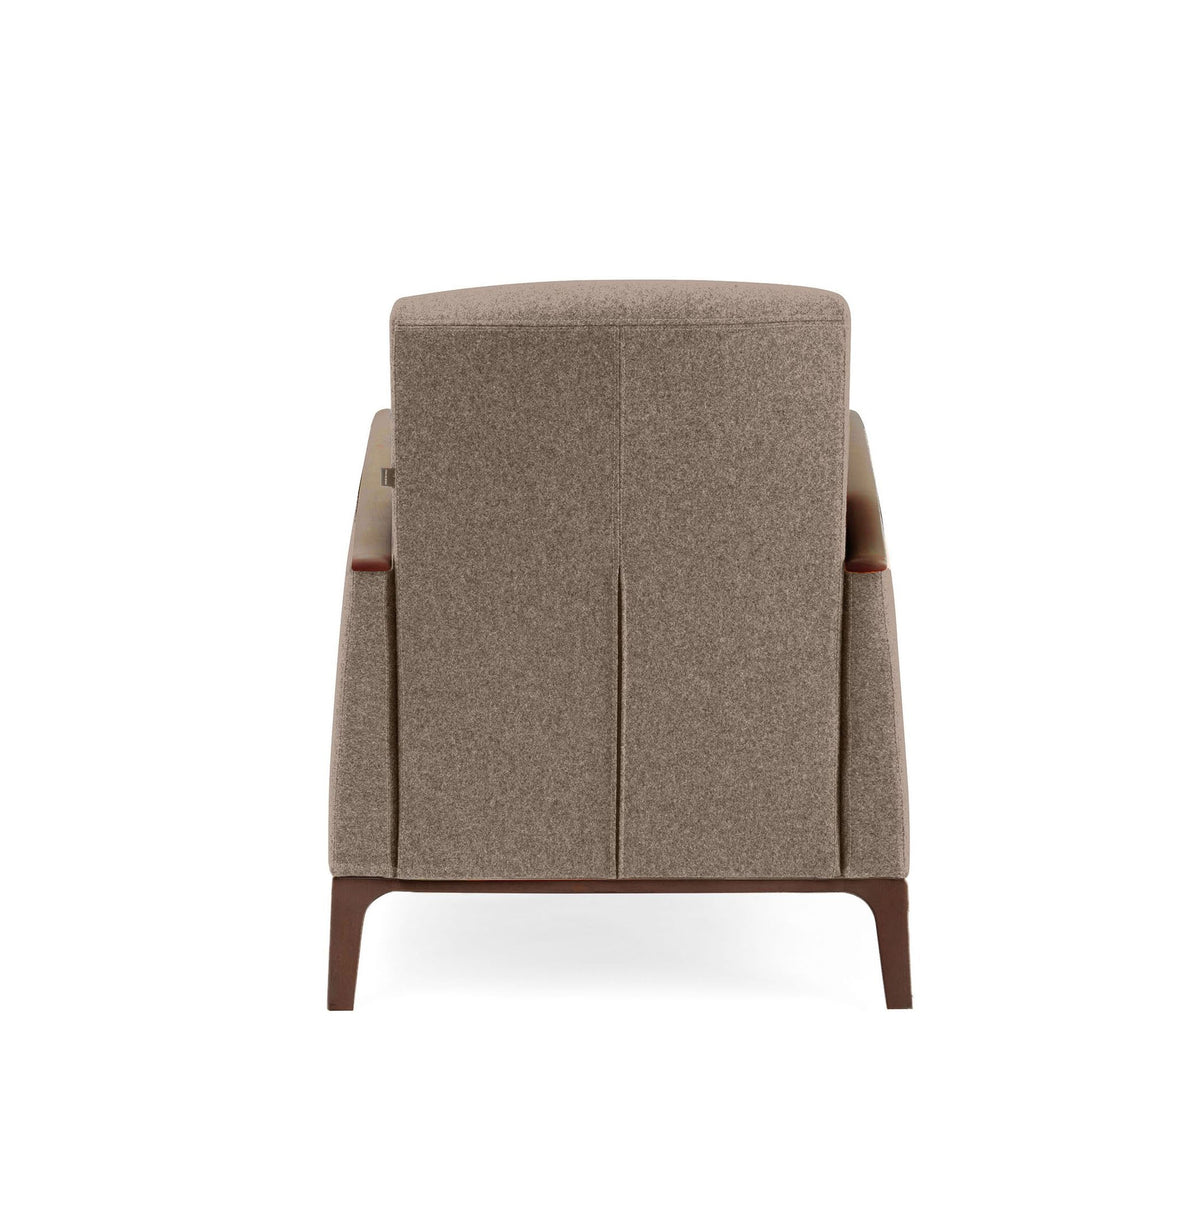 Mamy 57-64/1 Lounge Chair-Piaval-Contract Furniture Store